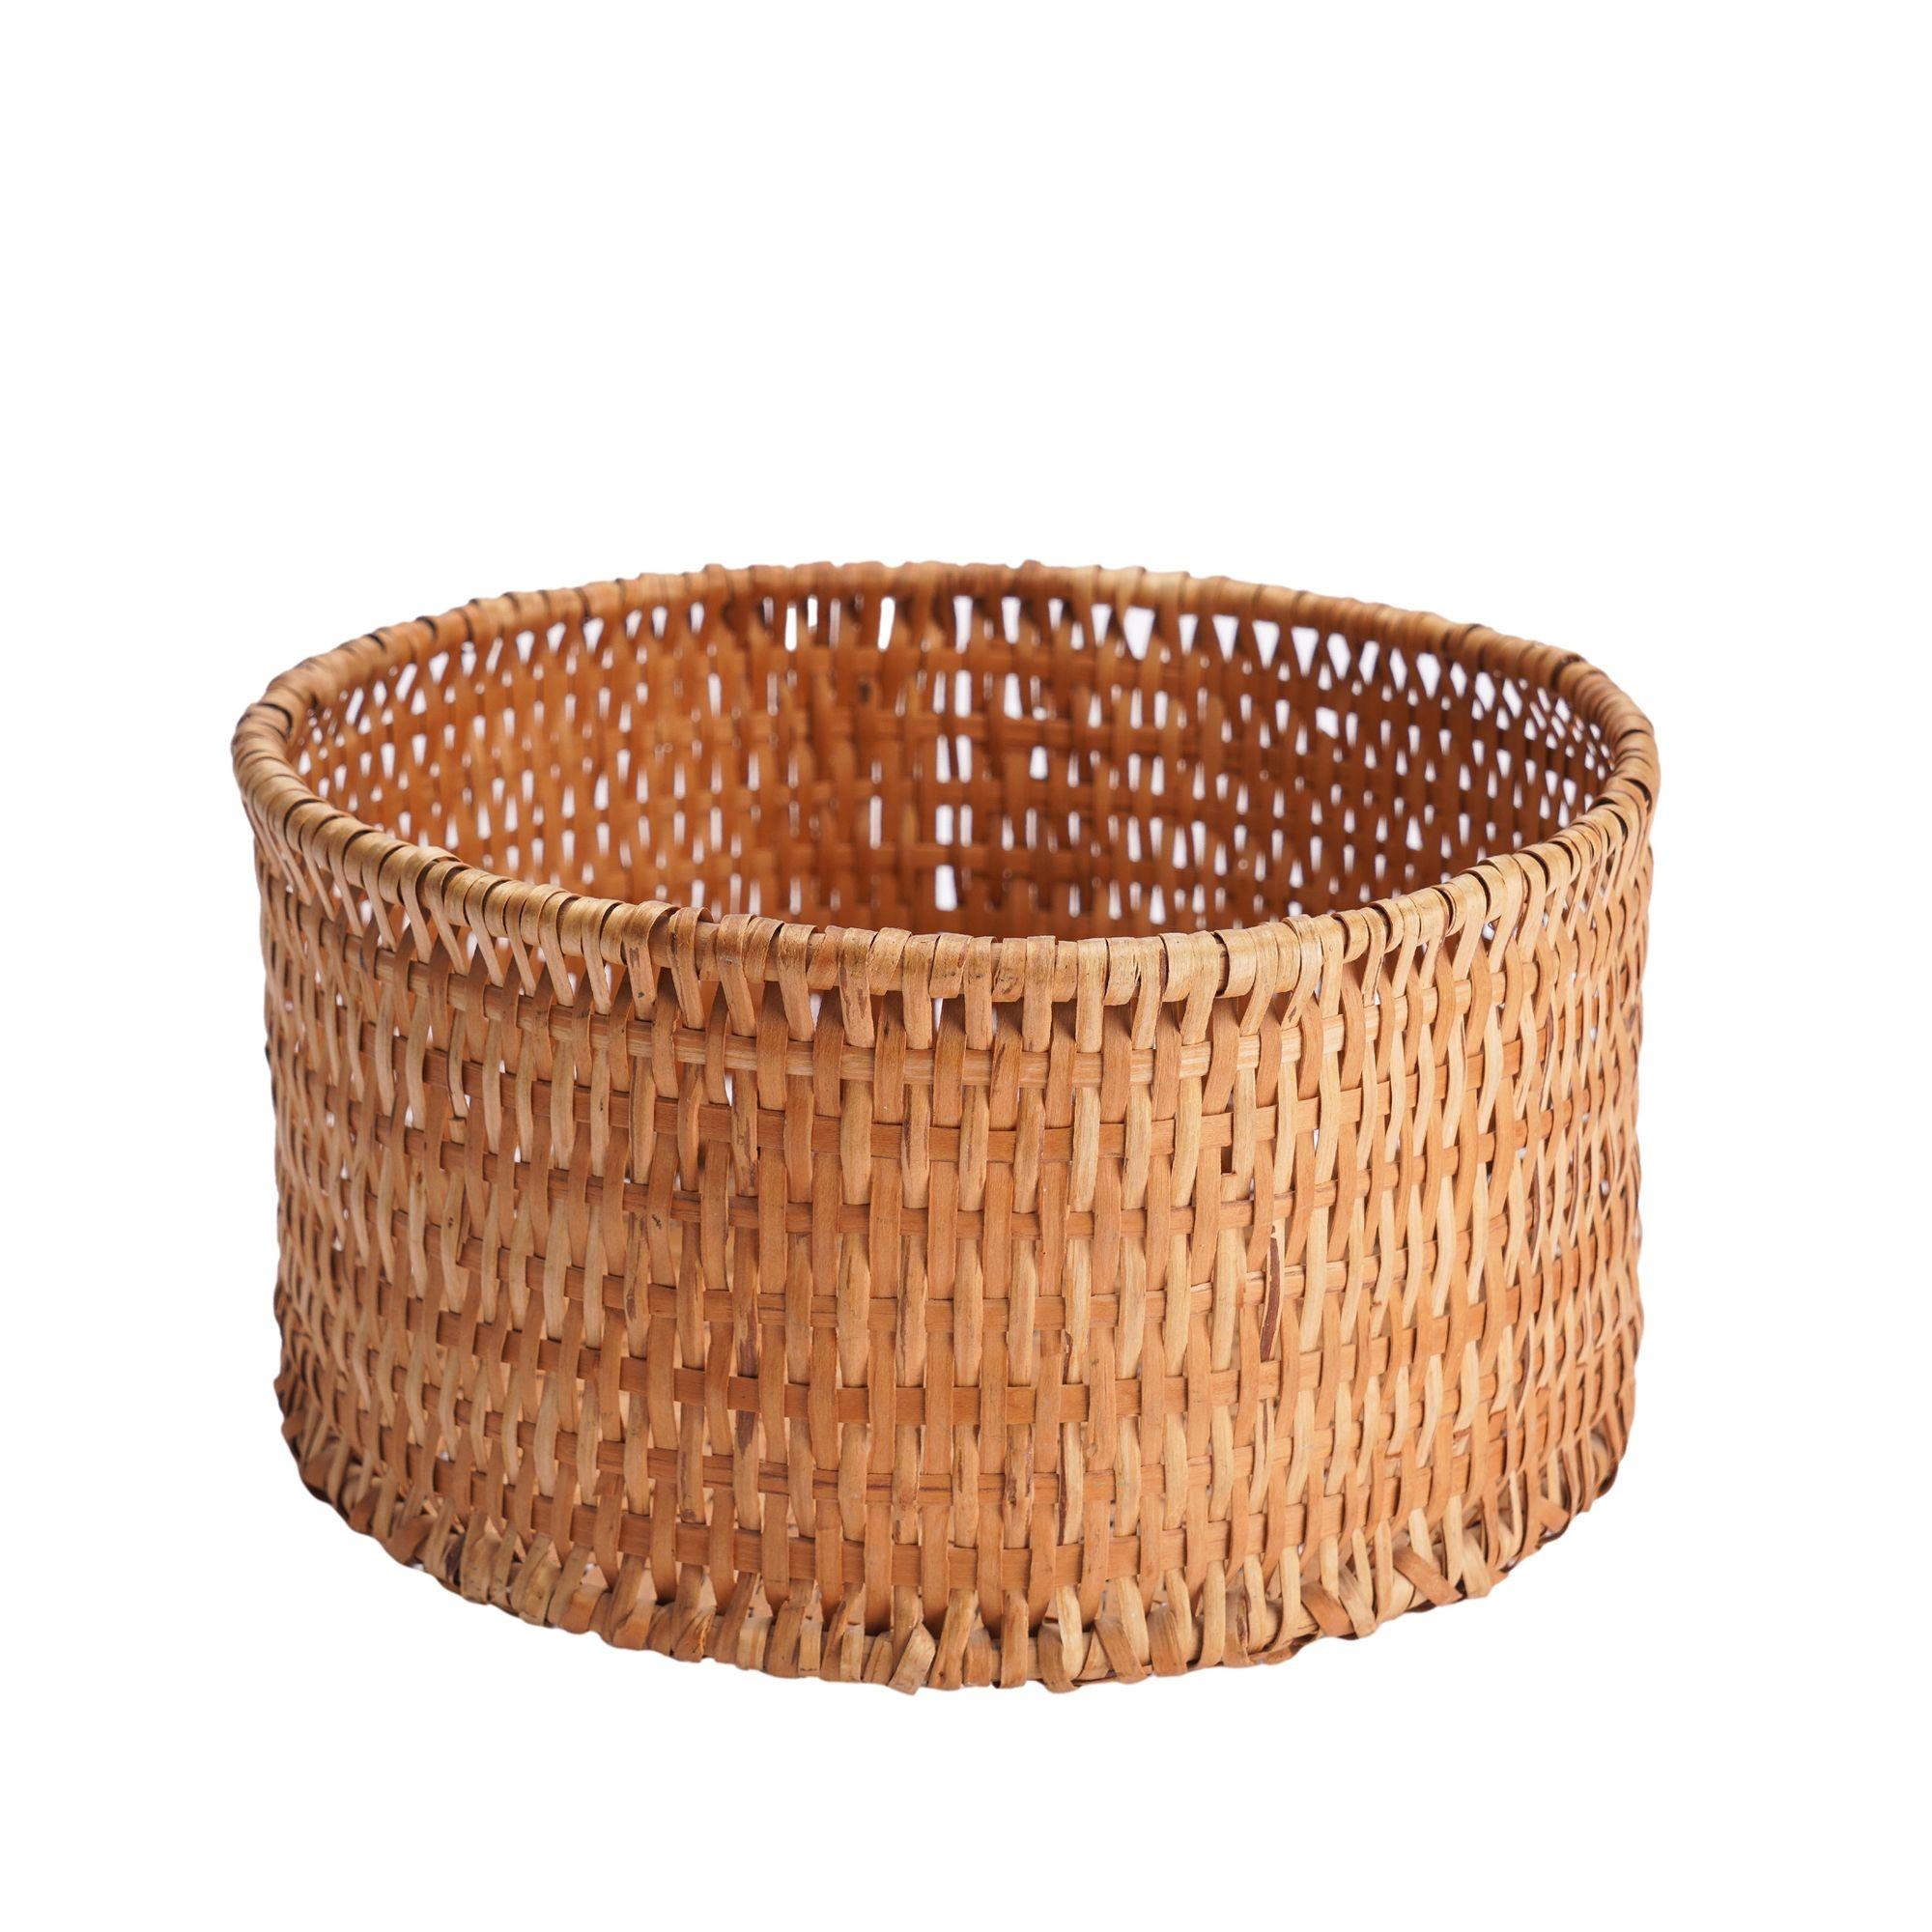 This Cherokee cylinder basket is framed by two carved and bent circular dowels, both at the top and bottom of the basket. Between are 1/8